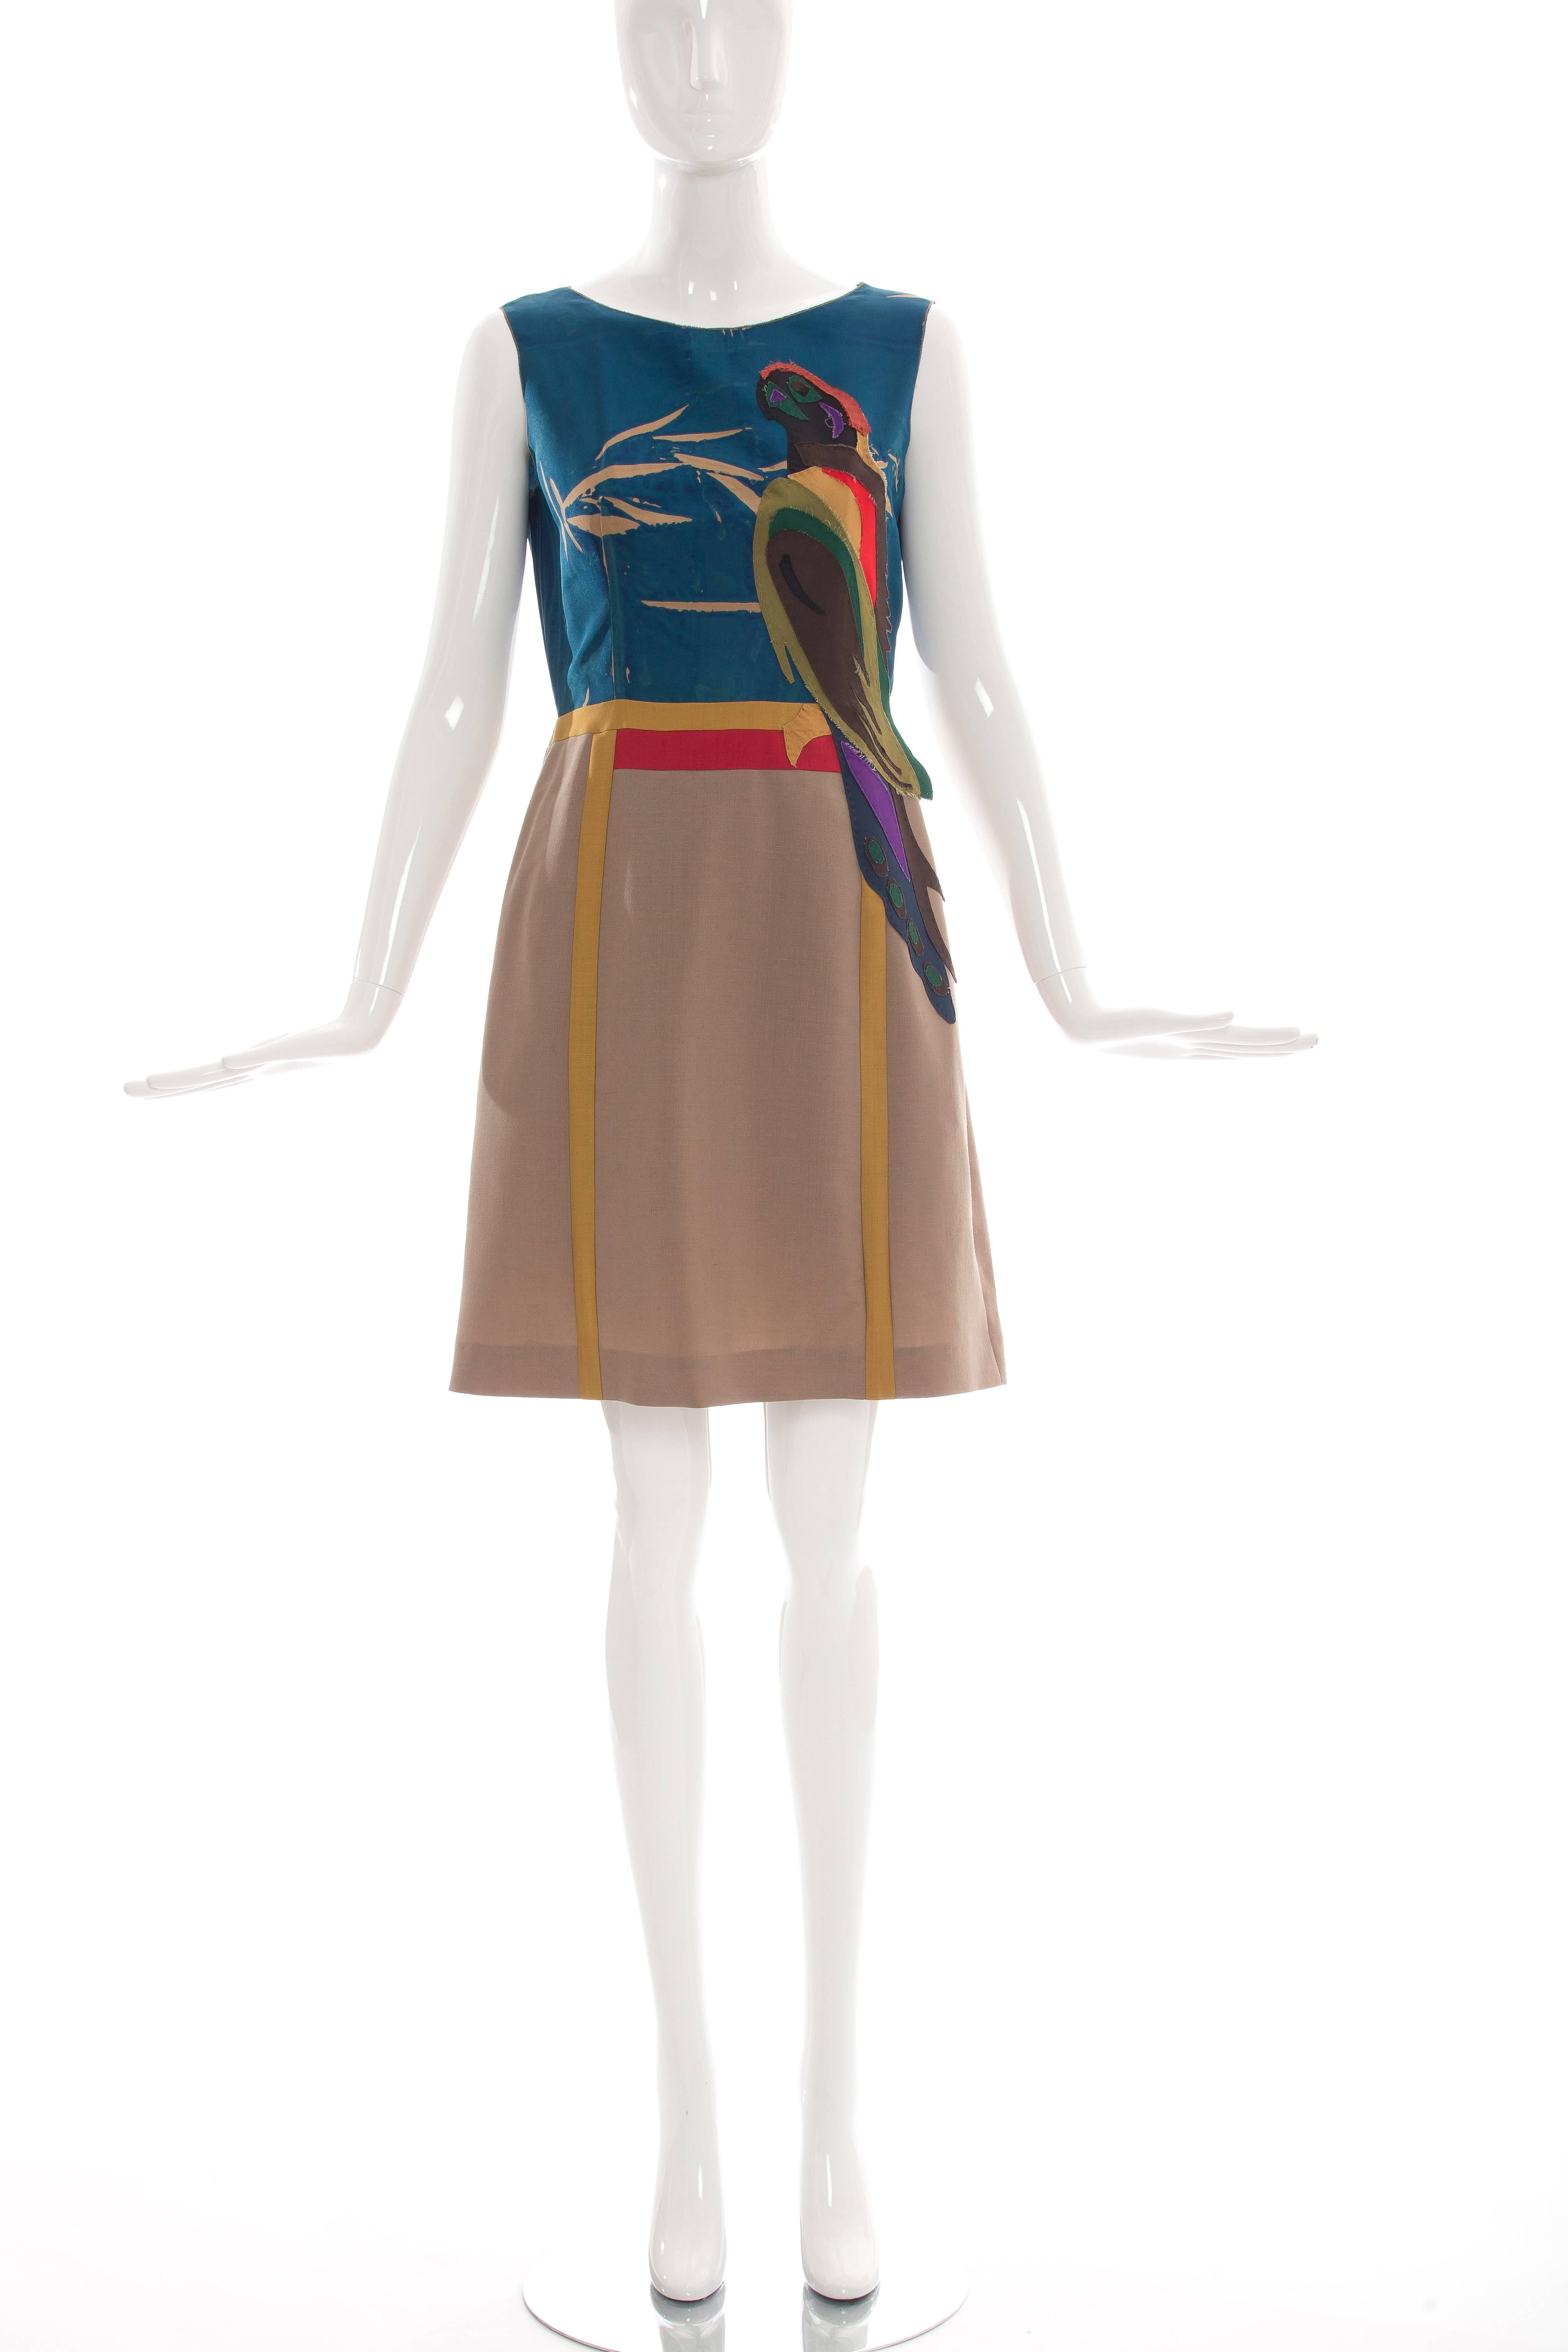 Prada, Spring 2005, sleeveless silk dress with applique parrot motif, wool skirt, fully lined and concealed side zip closure.

IT. 42
US. 6

Bust 34”, Waist 28”, Hip 37”, Length 36”
Fabric Content: 100% Silk; Bottom 60% Mohair, 40% Wool;